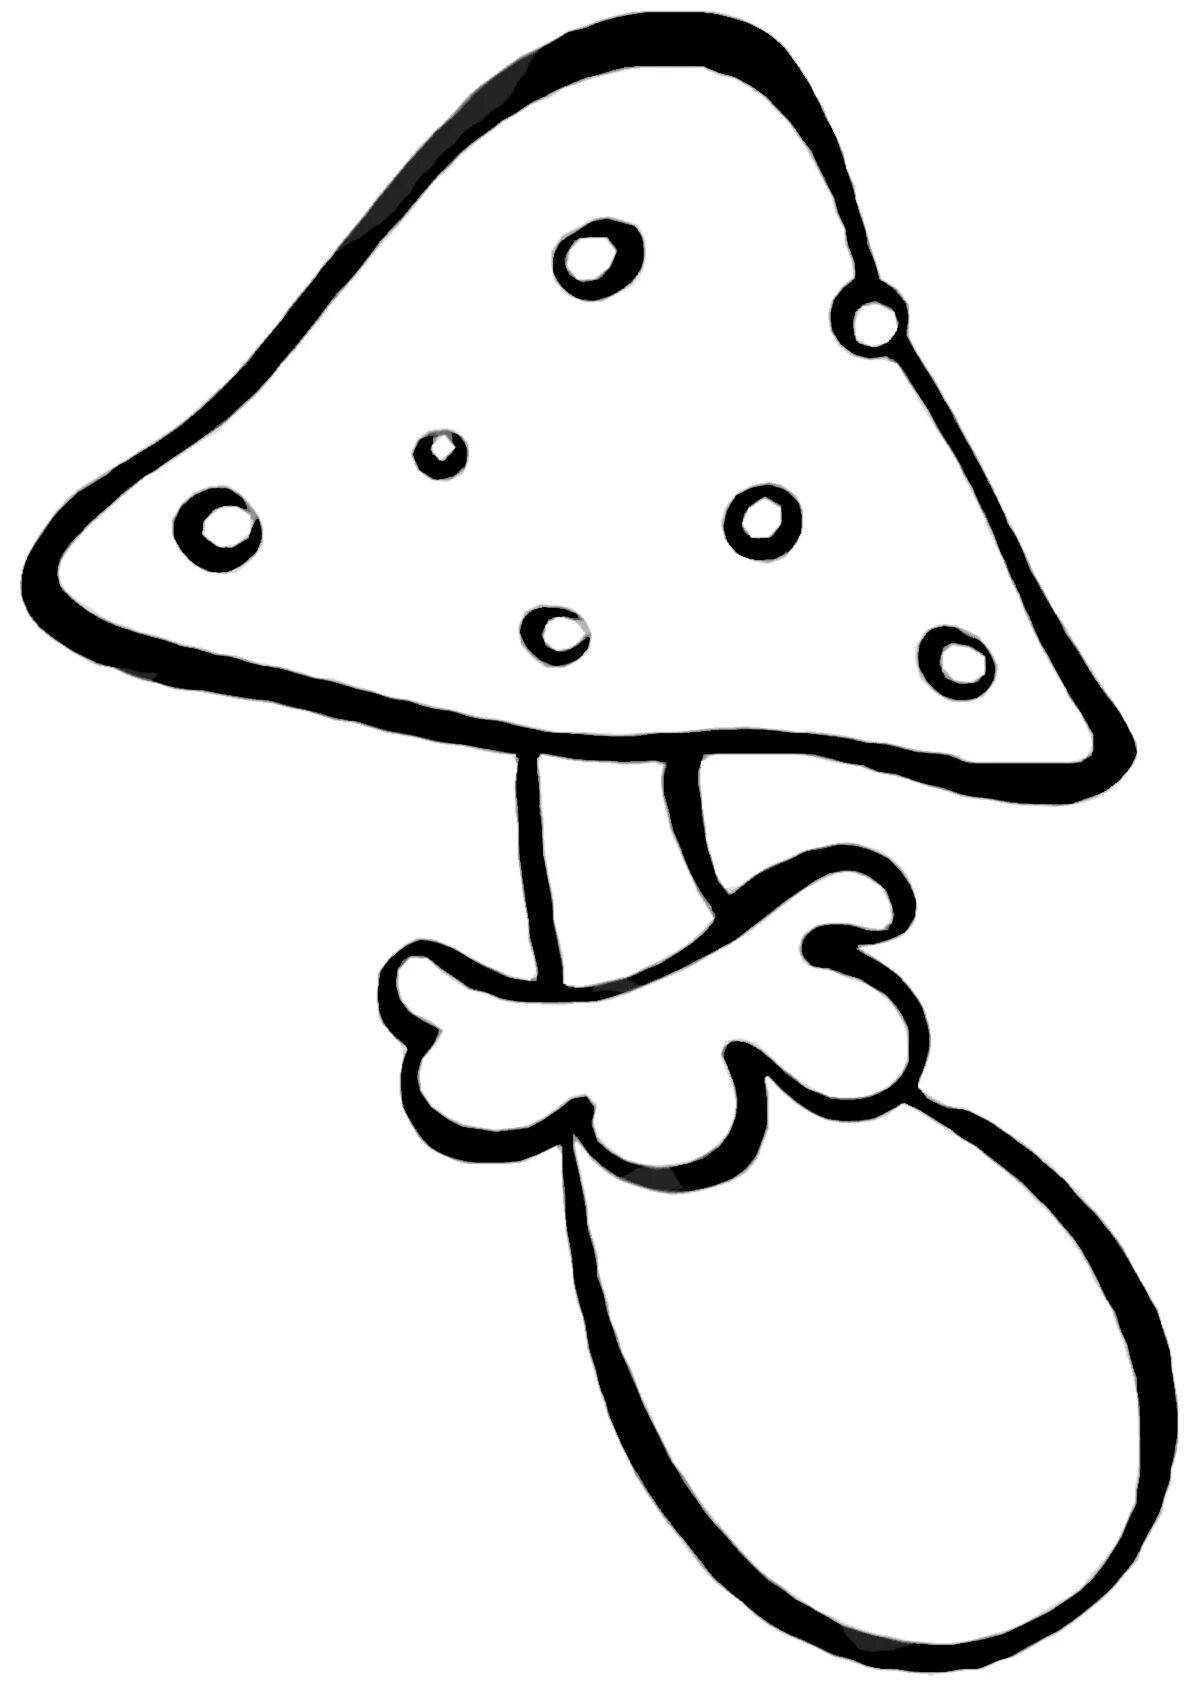 Great fly agaric drawing for beginners